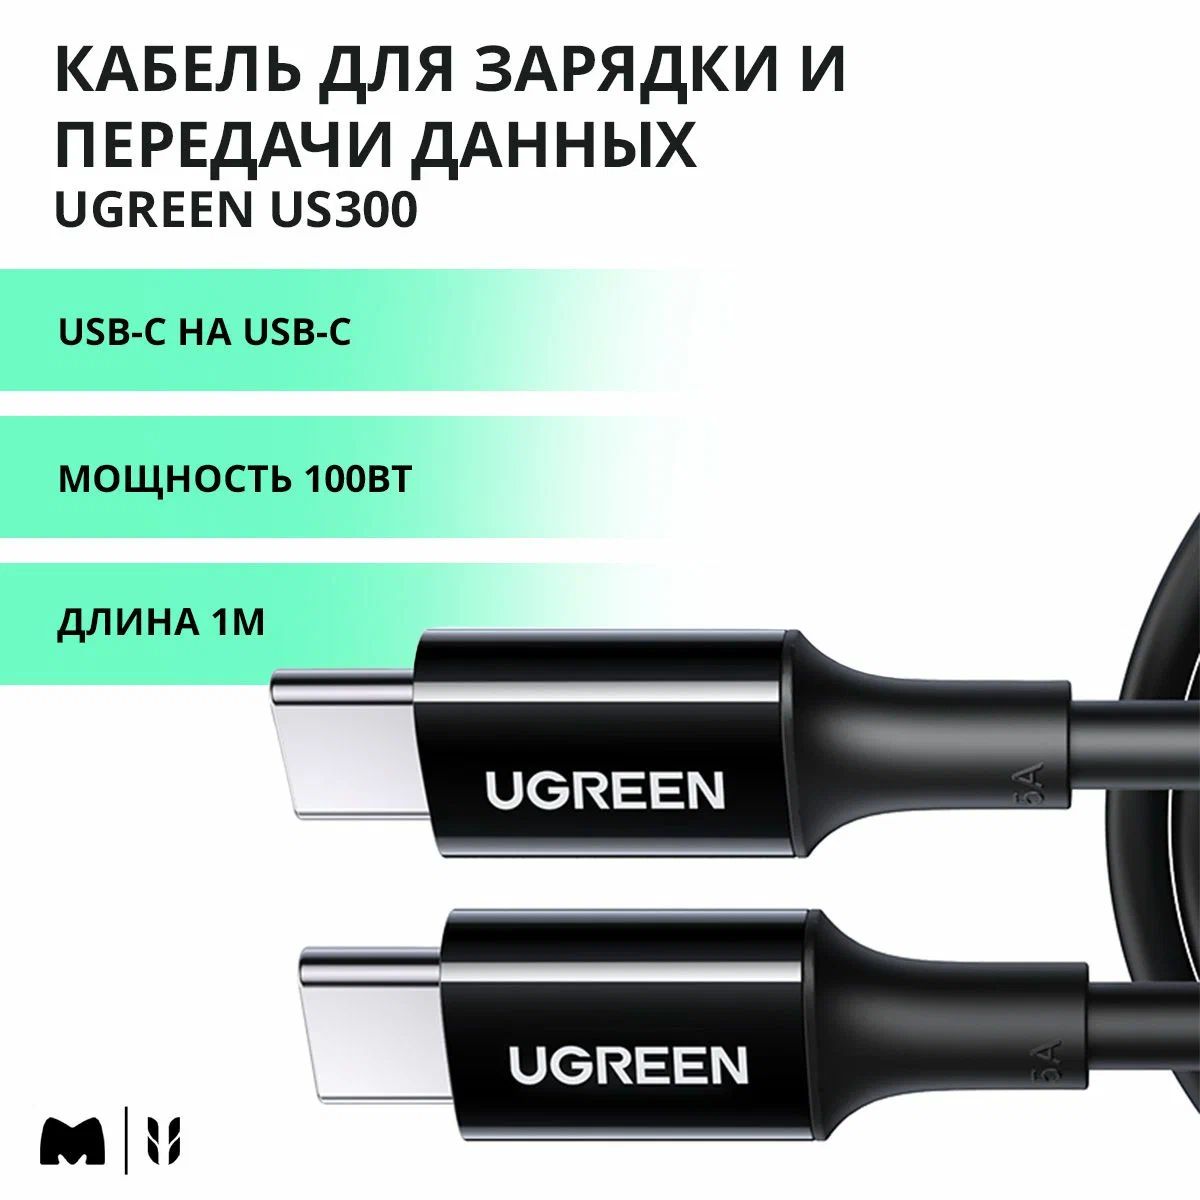 Кабель UGREEN Type-C Male to Type-C Male 2.0 ABS Shell 5A Current, длина 1м, цвет черный (80371) кабель ugreen us334 70643 usb c 2 0 male to angled 90° usb c 2 0 male 5a data cable 1м черный